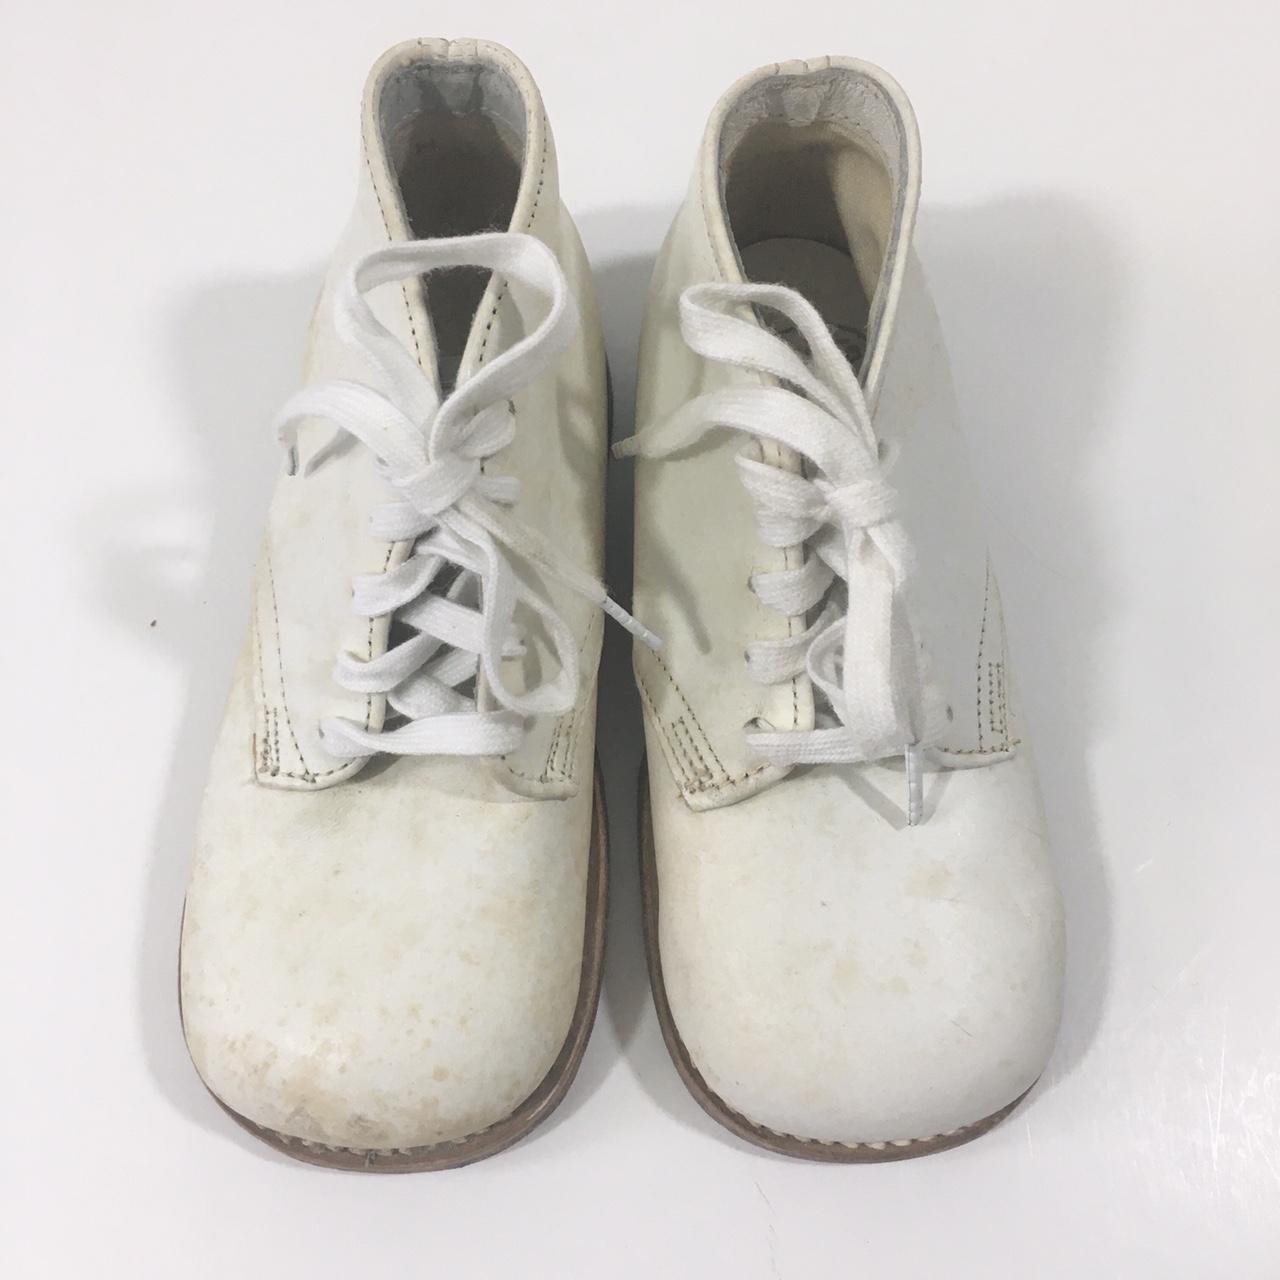 Vintage 50’s white leather baby shoes. The shoes are... - Depop